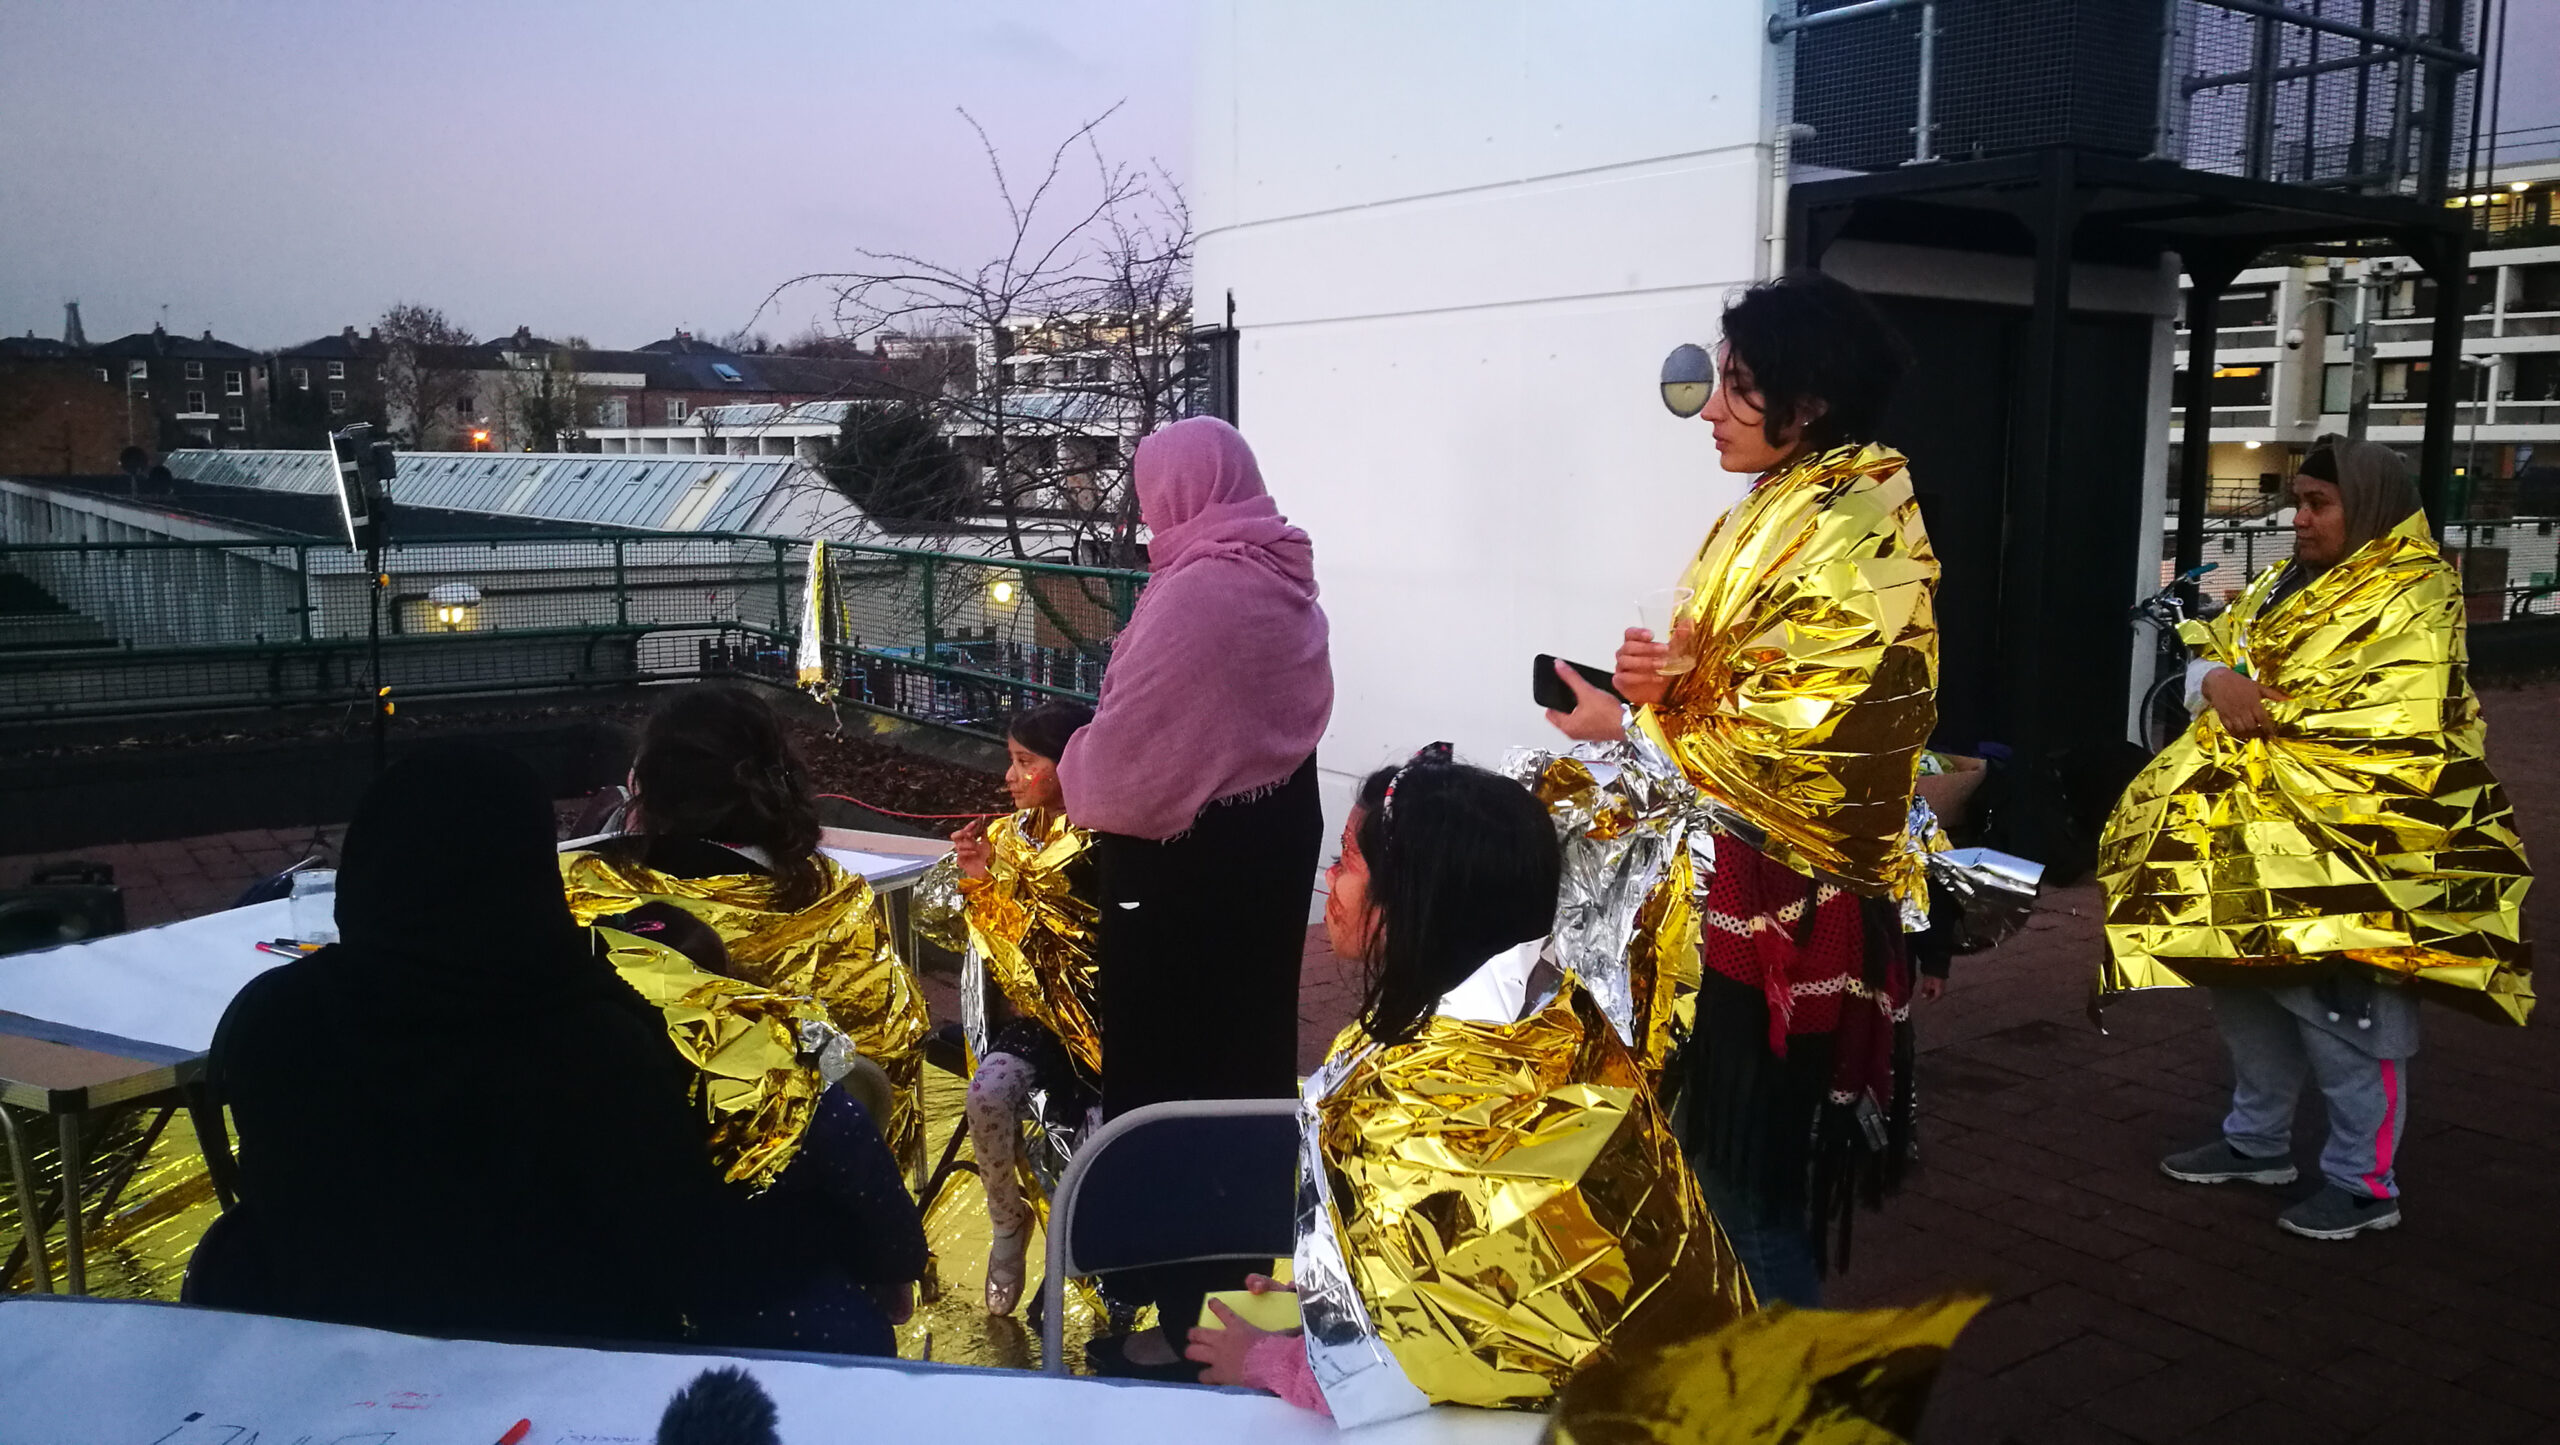 photograph of women in gold heat blankets participating in an activity on a rooftop